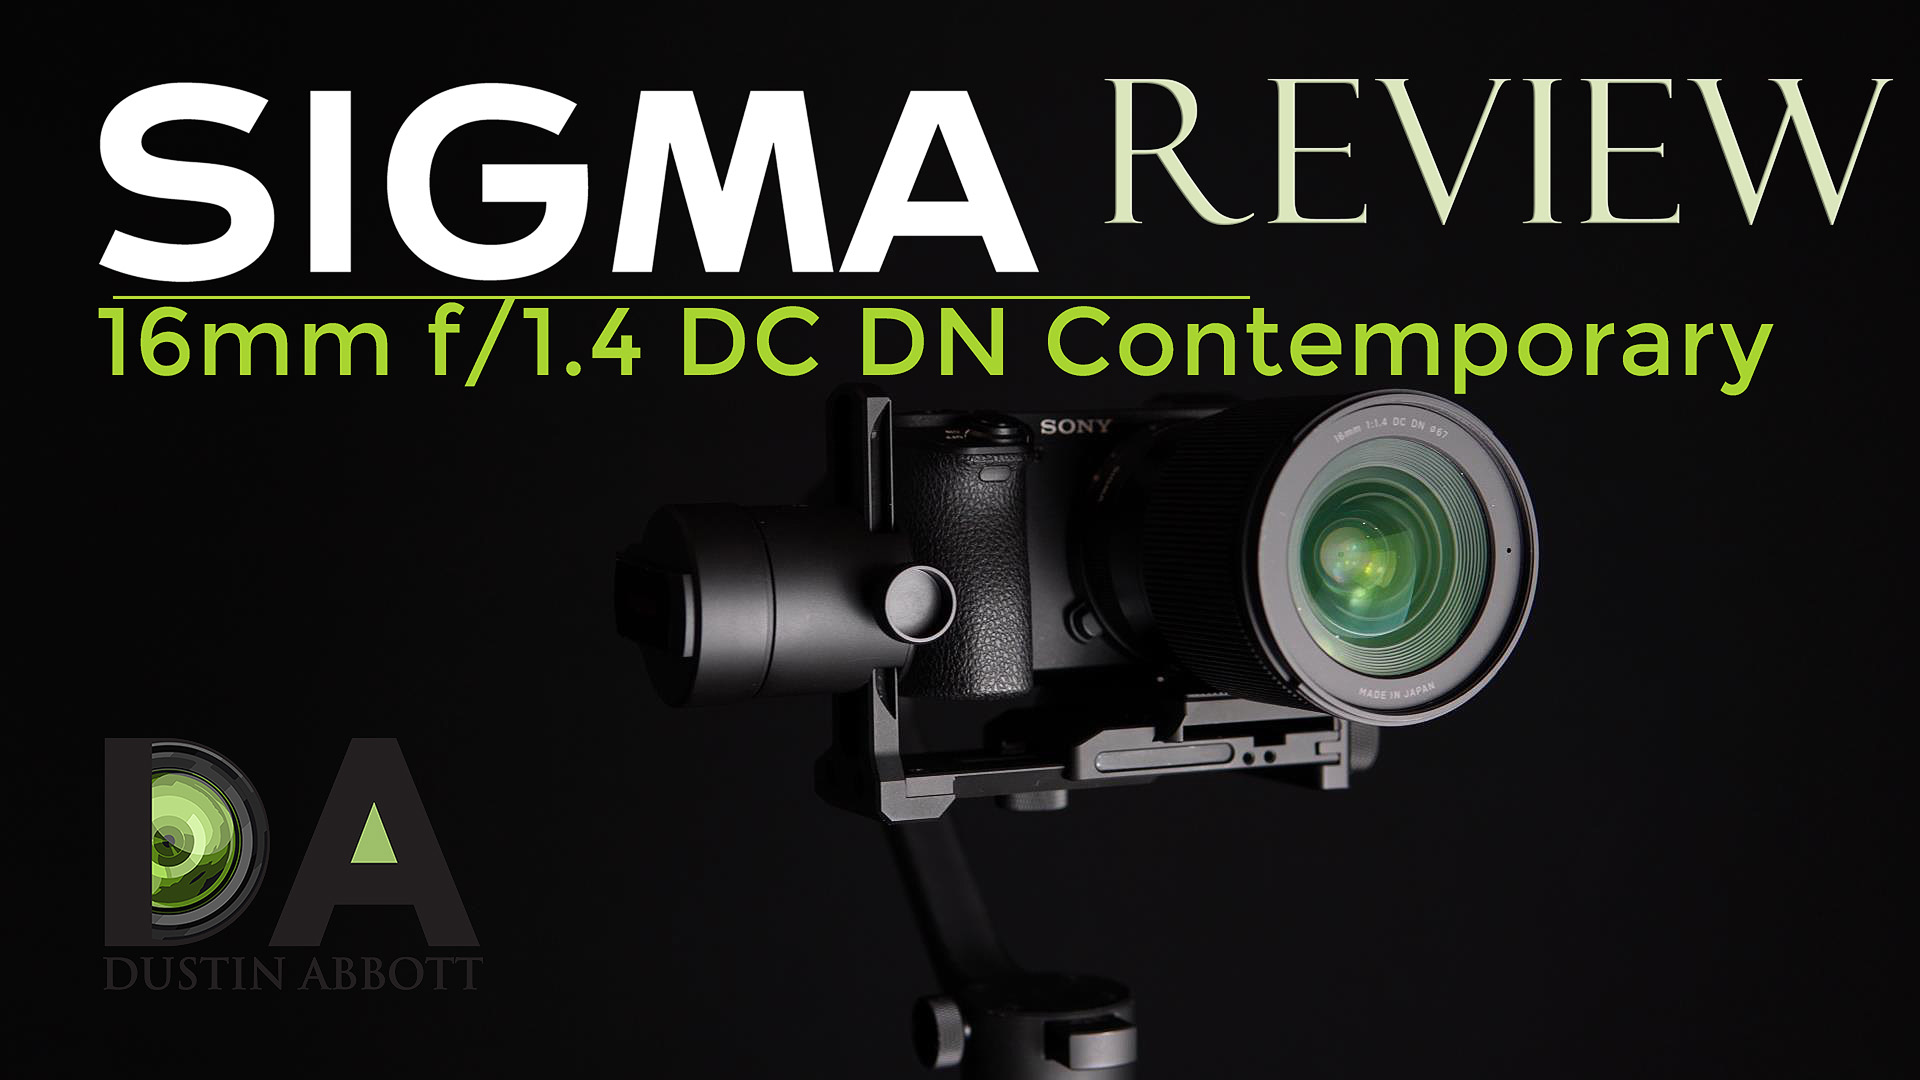 Sigma 16mm f/1.4 DC DN Contemporary Review - DustinAbbott.net